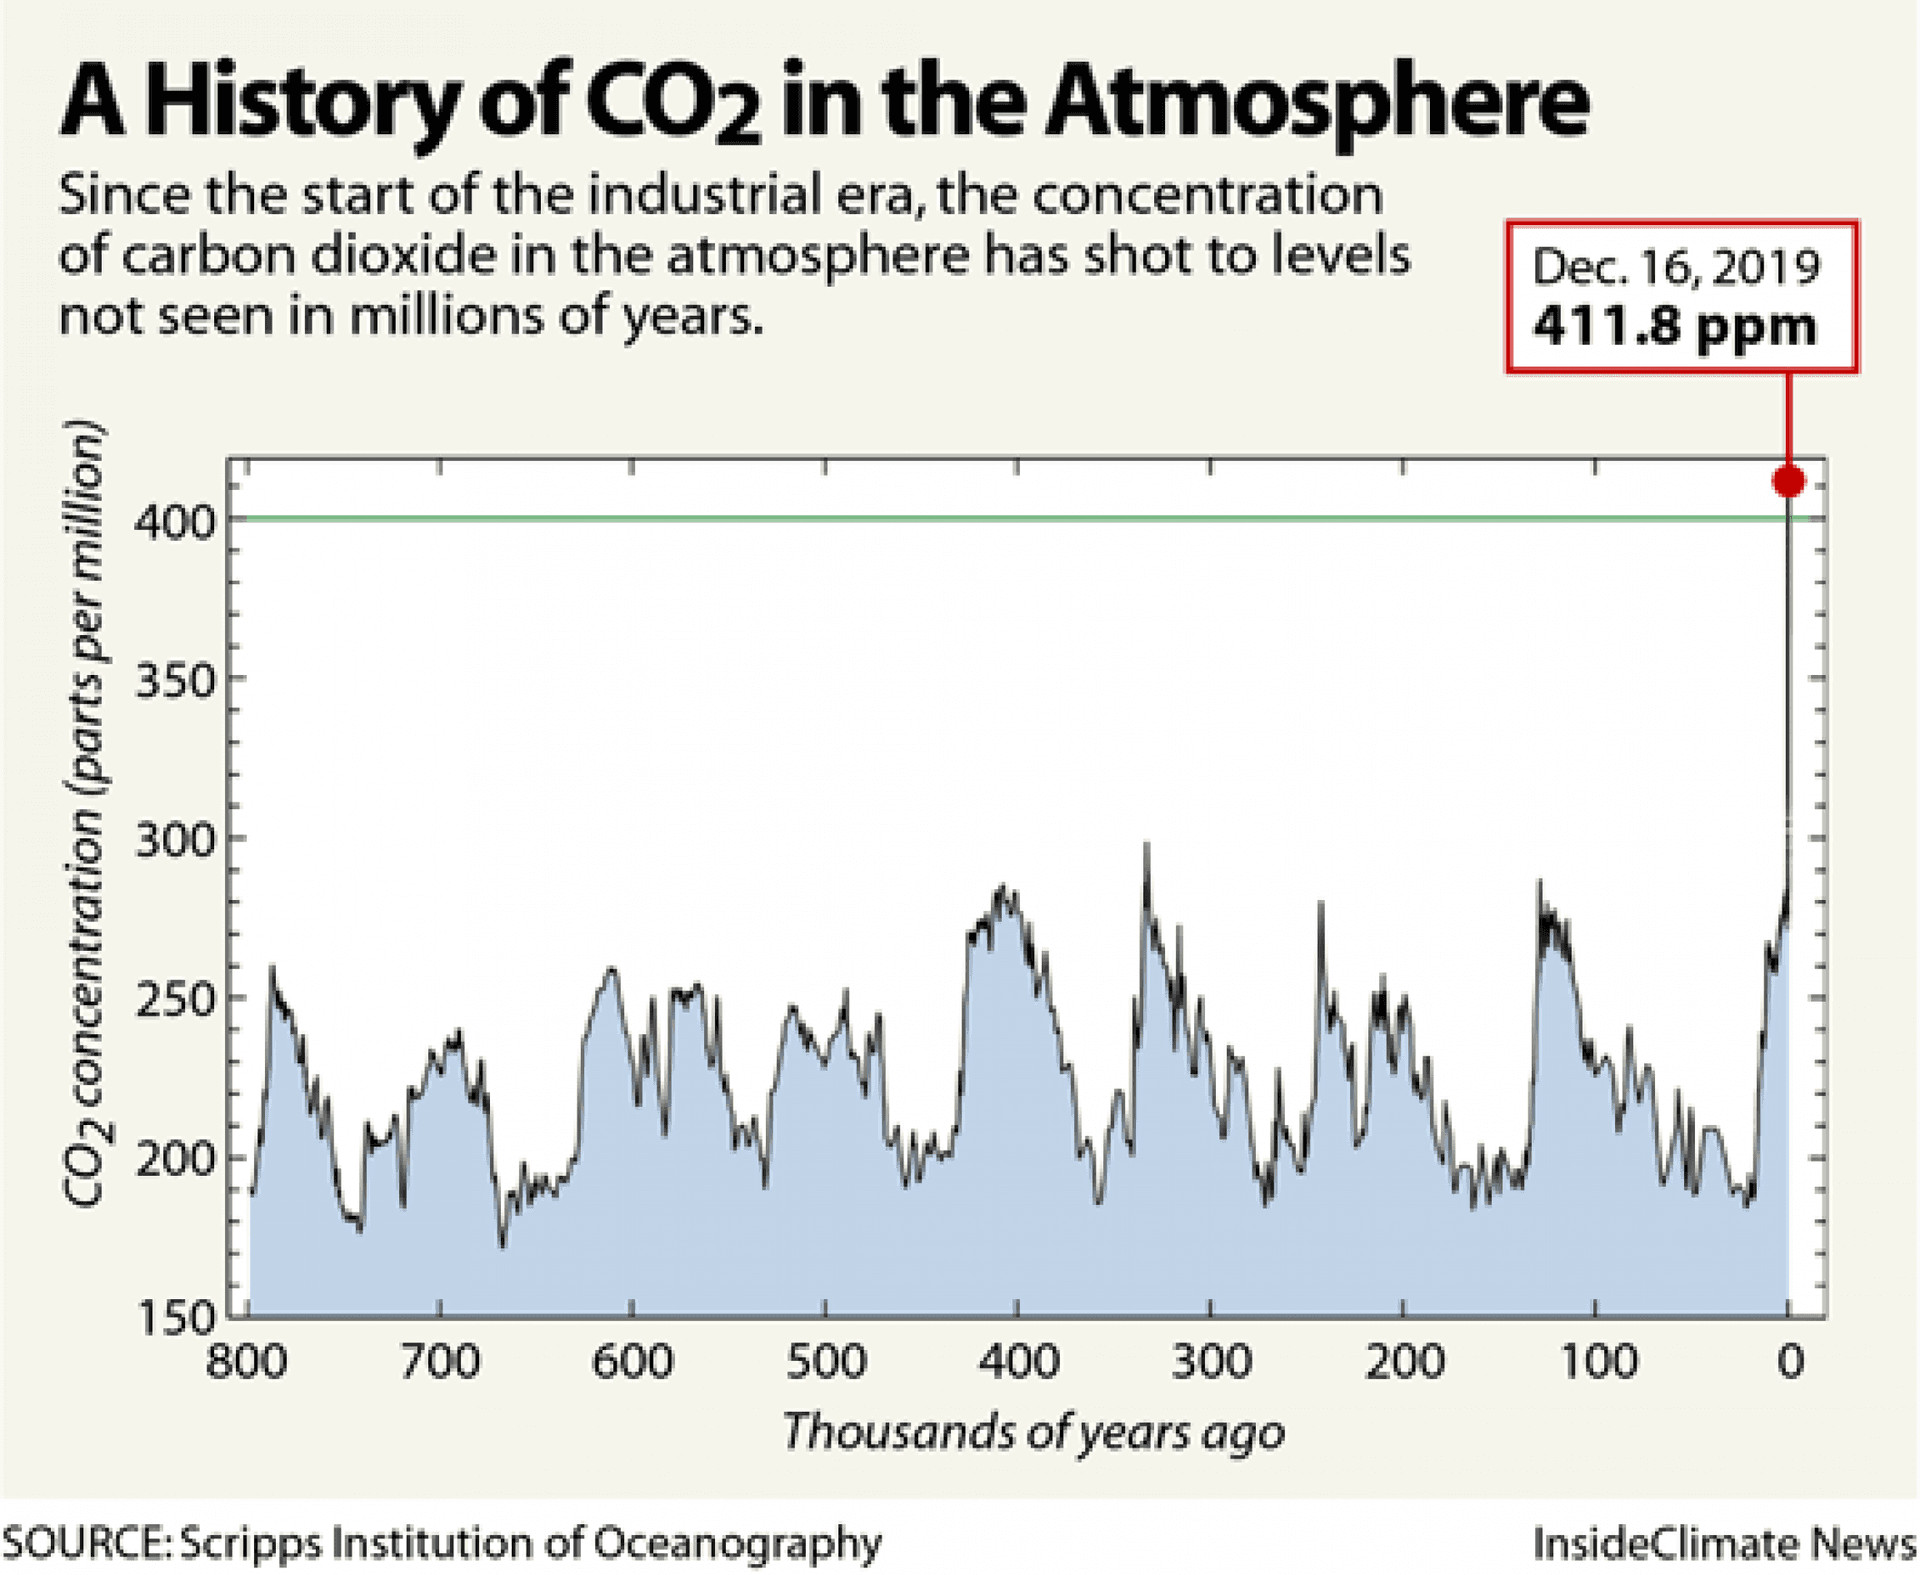 A graph showing CO2 concentrations over hundreds of years.